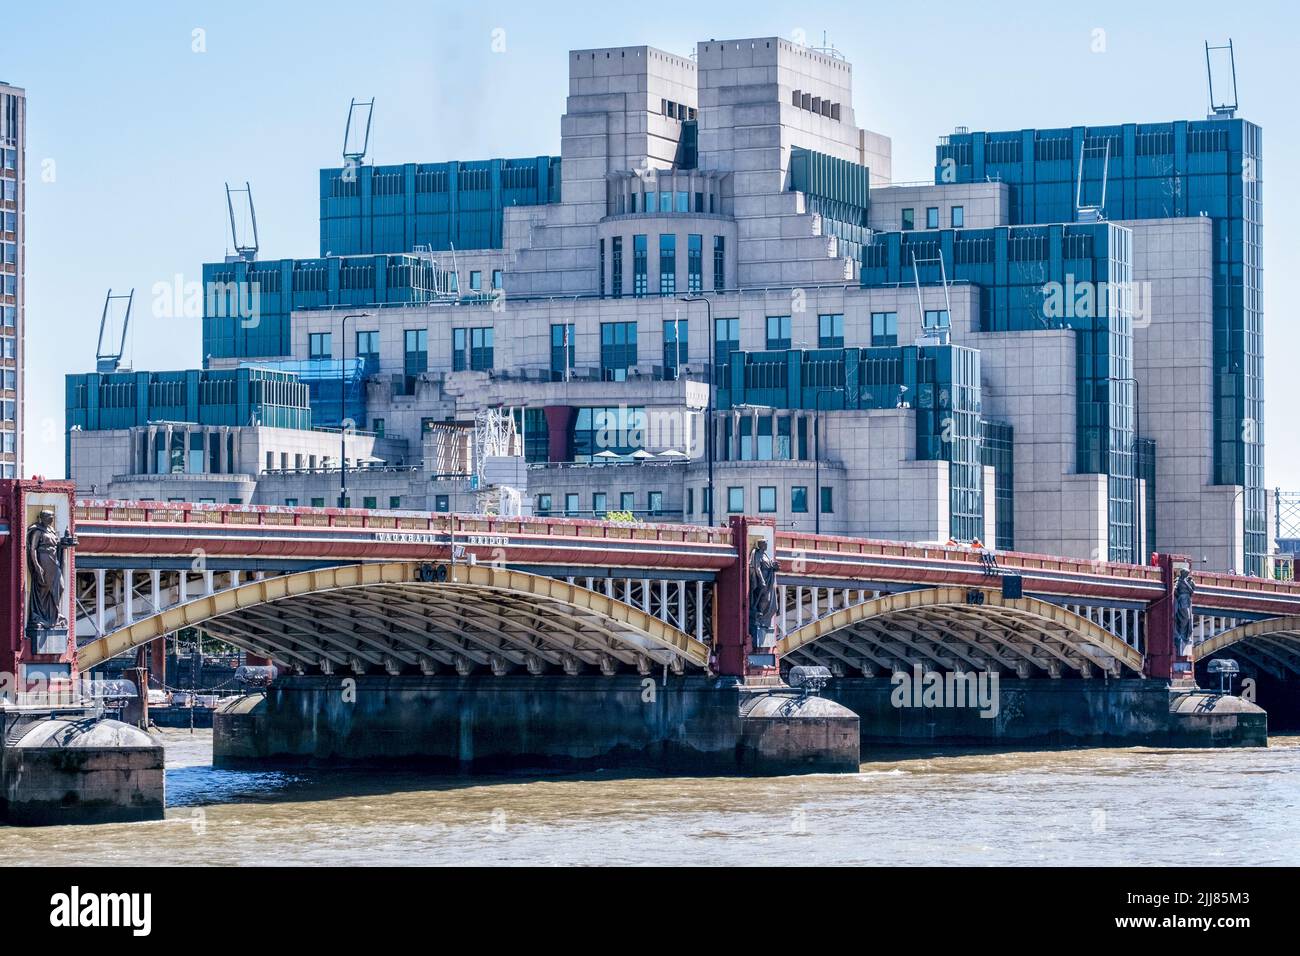 SIS/MI6 Headquarters building at Vauxhall Cross, with Vauxhall Bridge in the foreground. Stock Photo